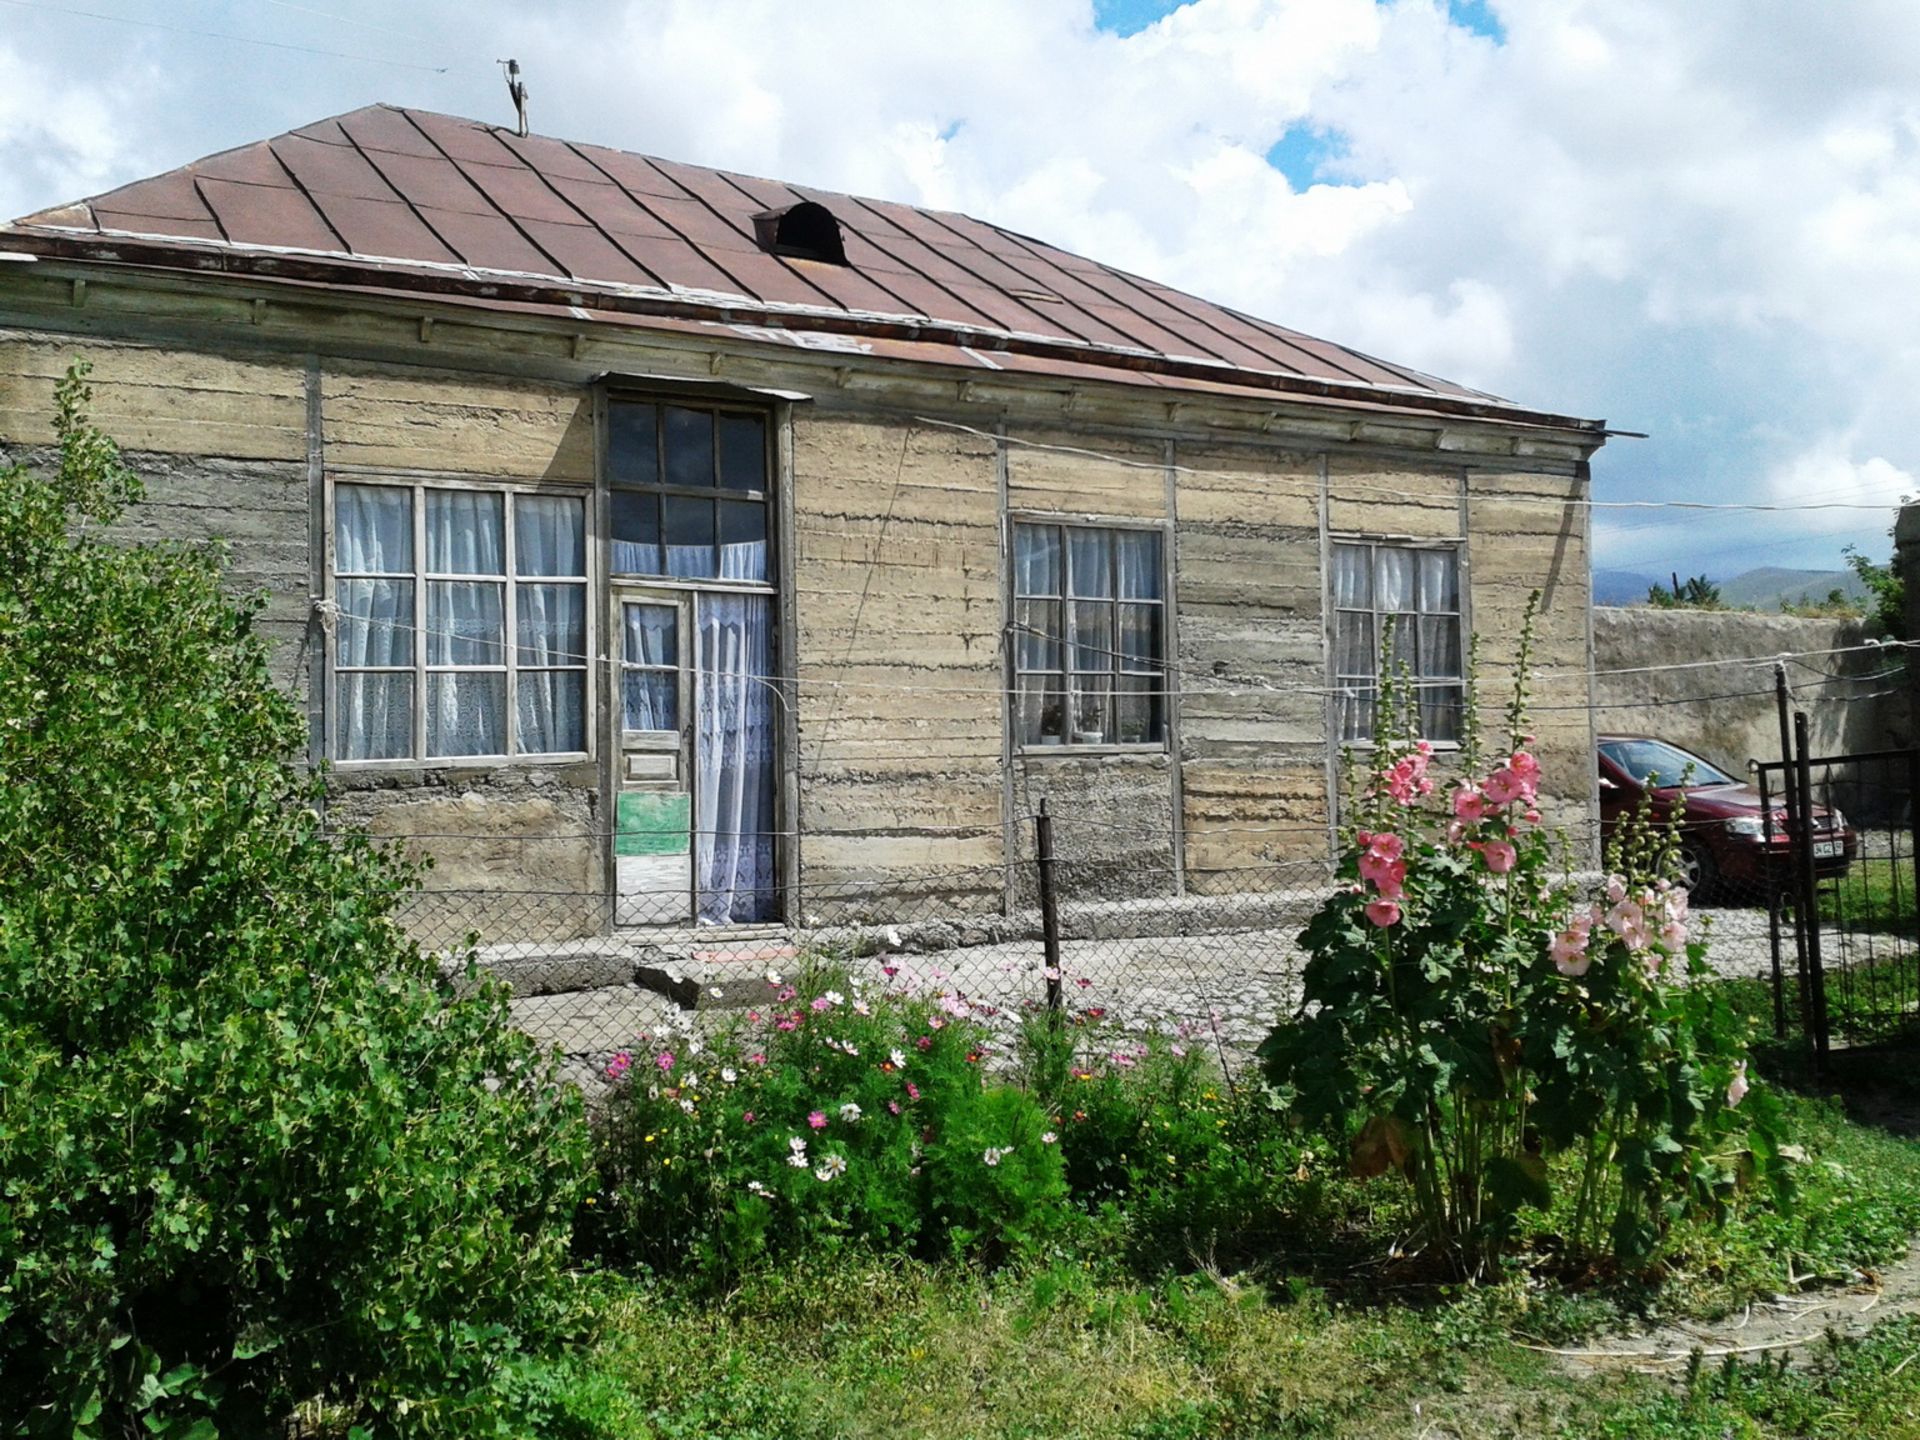 HOUSE IN 1 ACRE IN SOTK, ARMENIA - Image 10 of 35